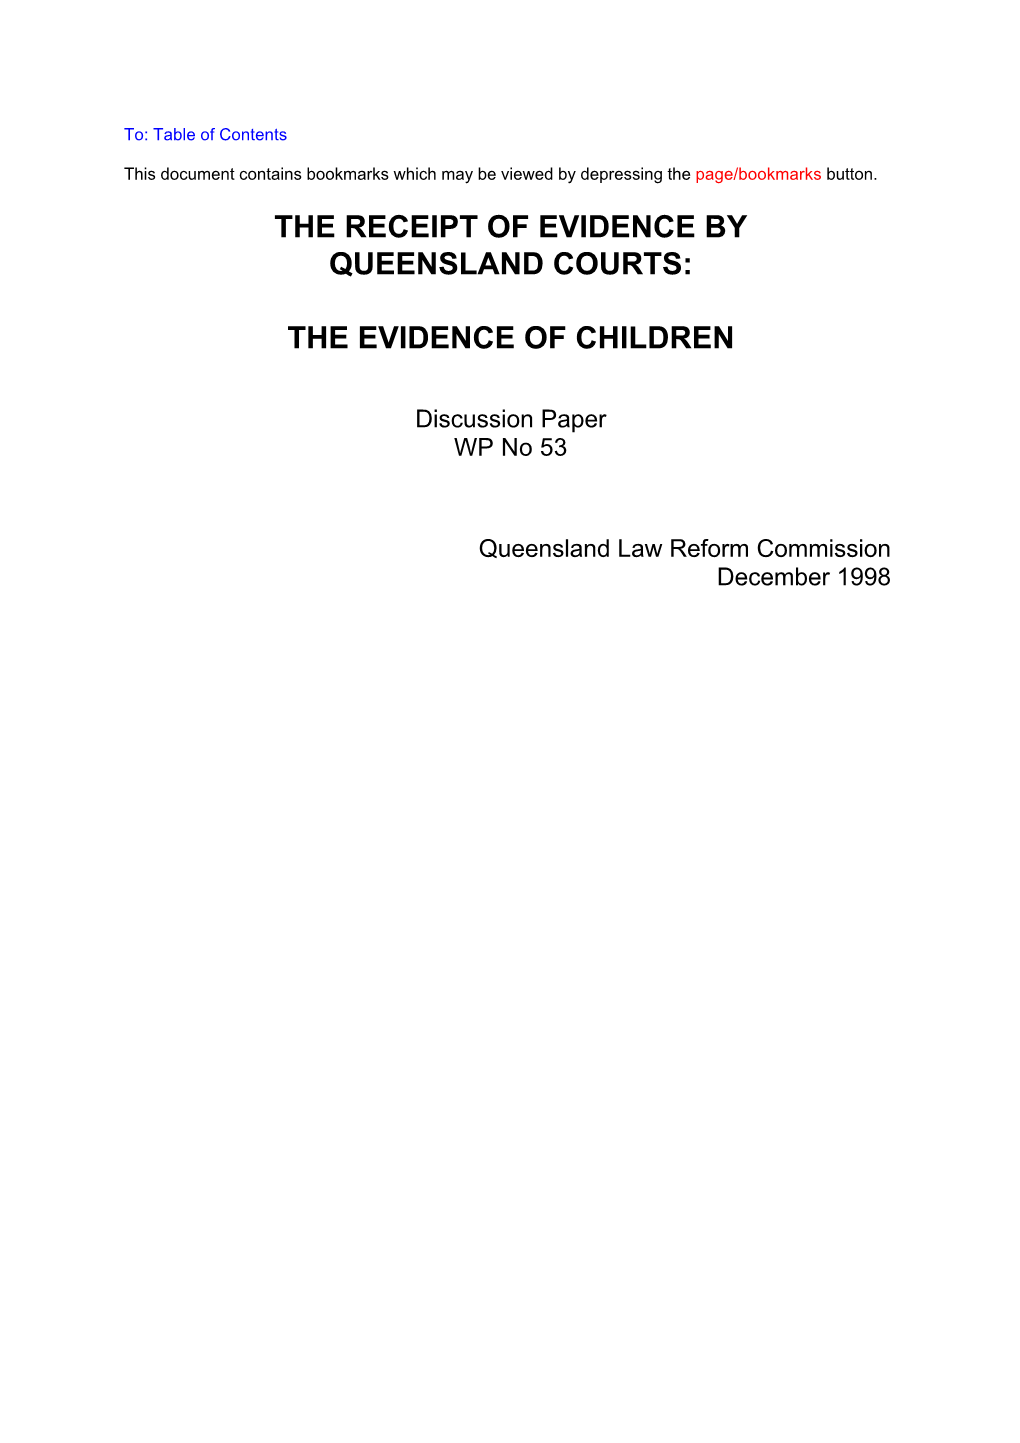 The Receipt of Evidence by Queensland Courts